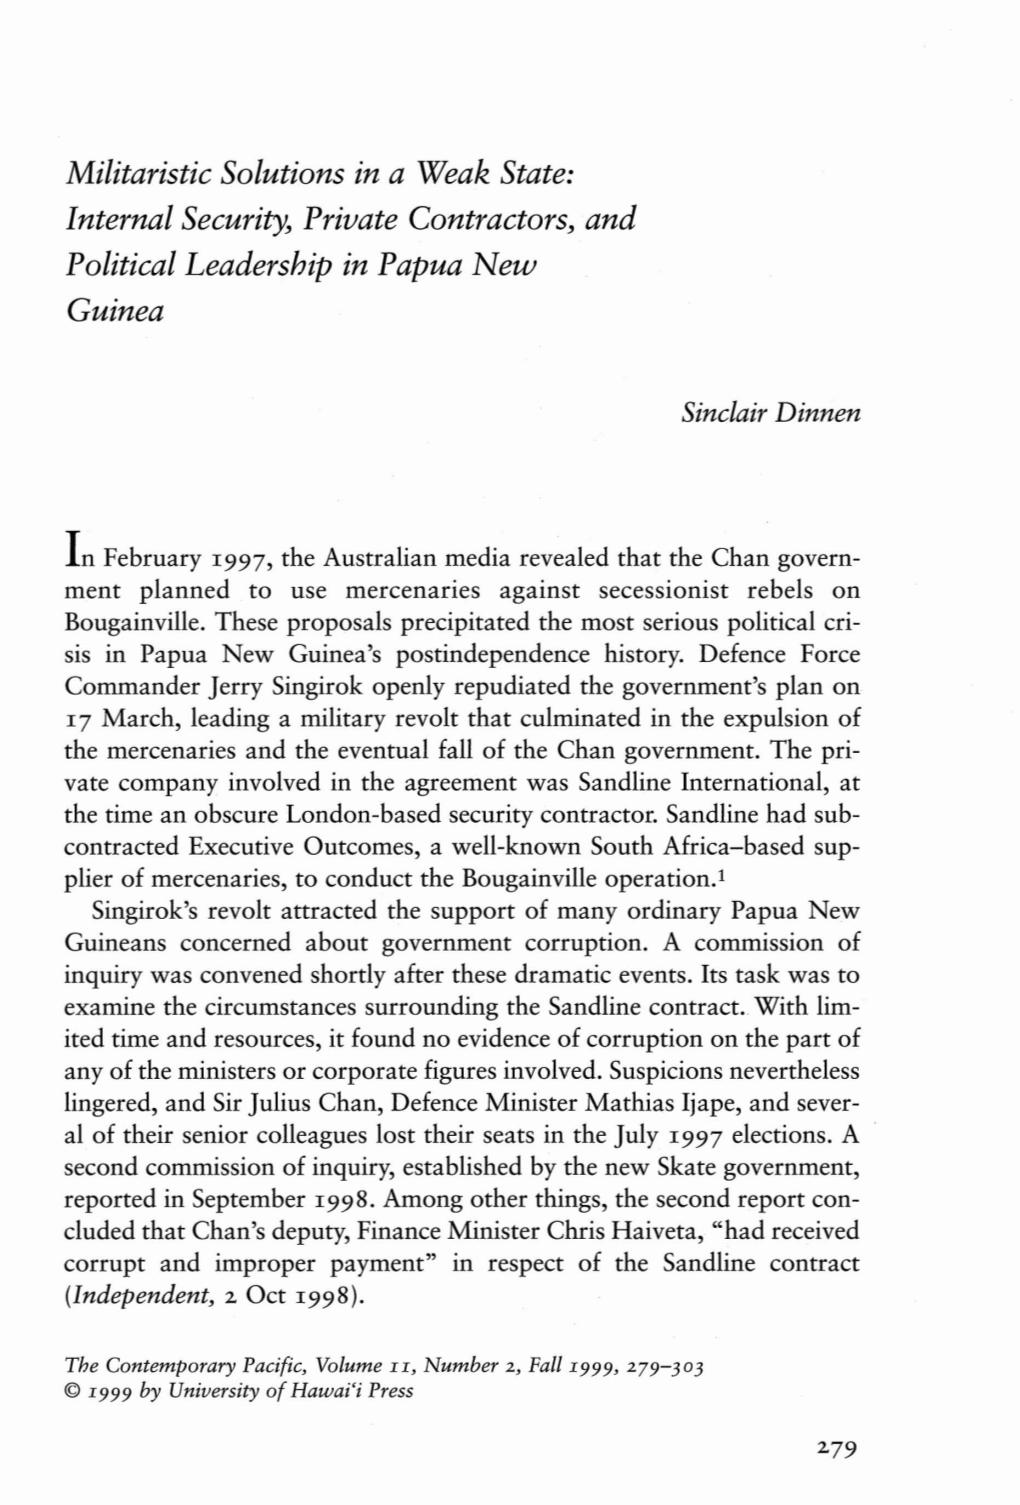 Internal Security, Private Contractors, and Political Leadership in Papua New Guinea